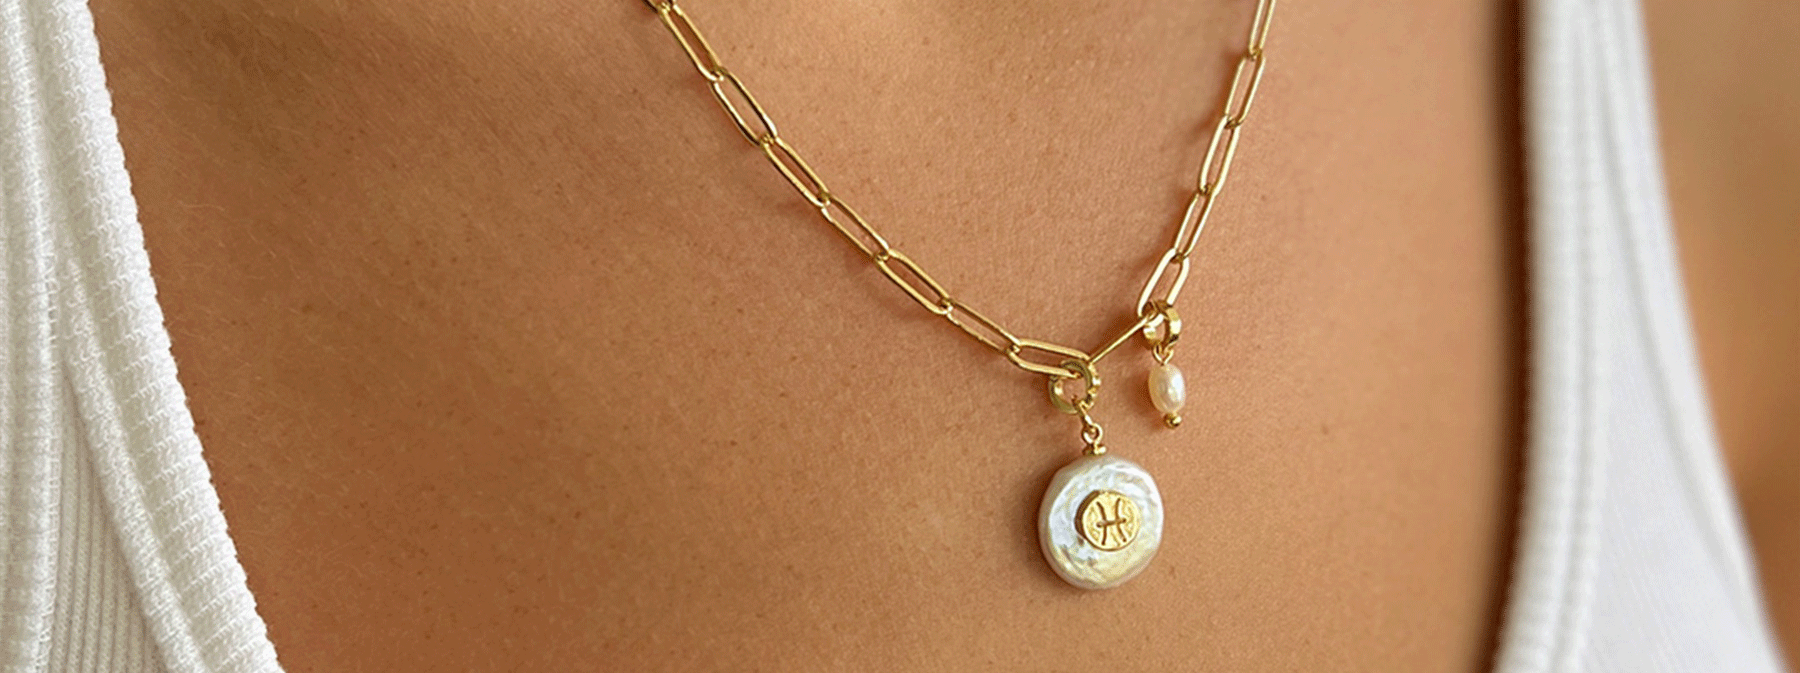 Arms Of Eve Charm builder necklace modeled by woman with a gold chain necklace featuring a delicate pearl pendant